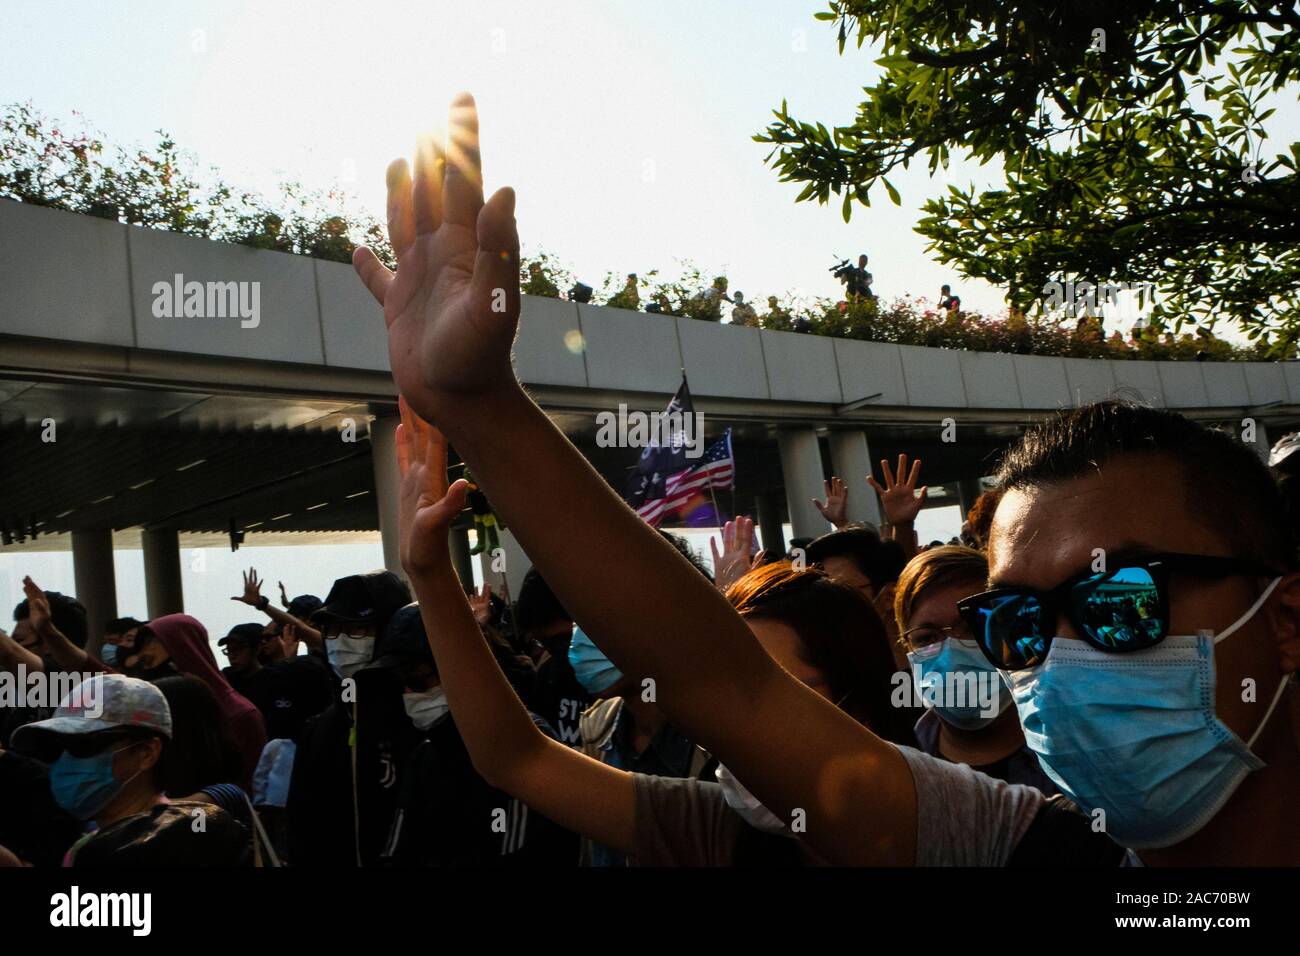 Protesters with dust masks make gestures during the demonstration.Demonstrations in Hong Kong continue as pro-democracy groups won the District Council elections recently. Protesters continue to call for Hong Kong's government to meet their 5 demands. Stock Photo